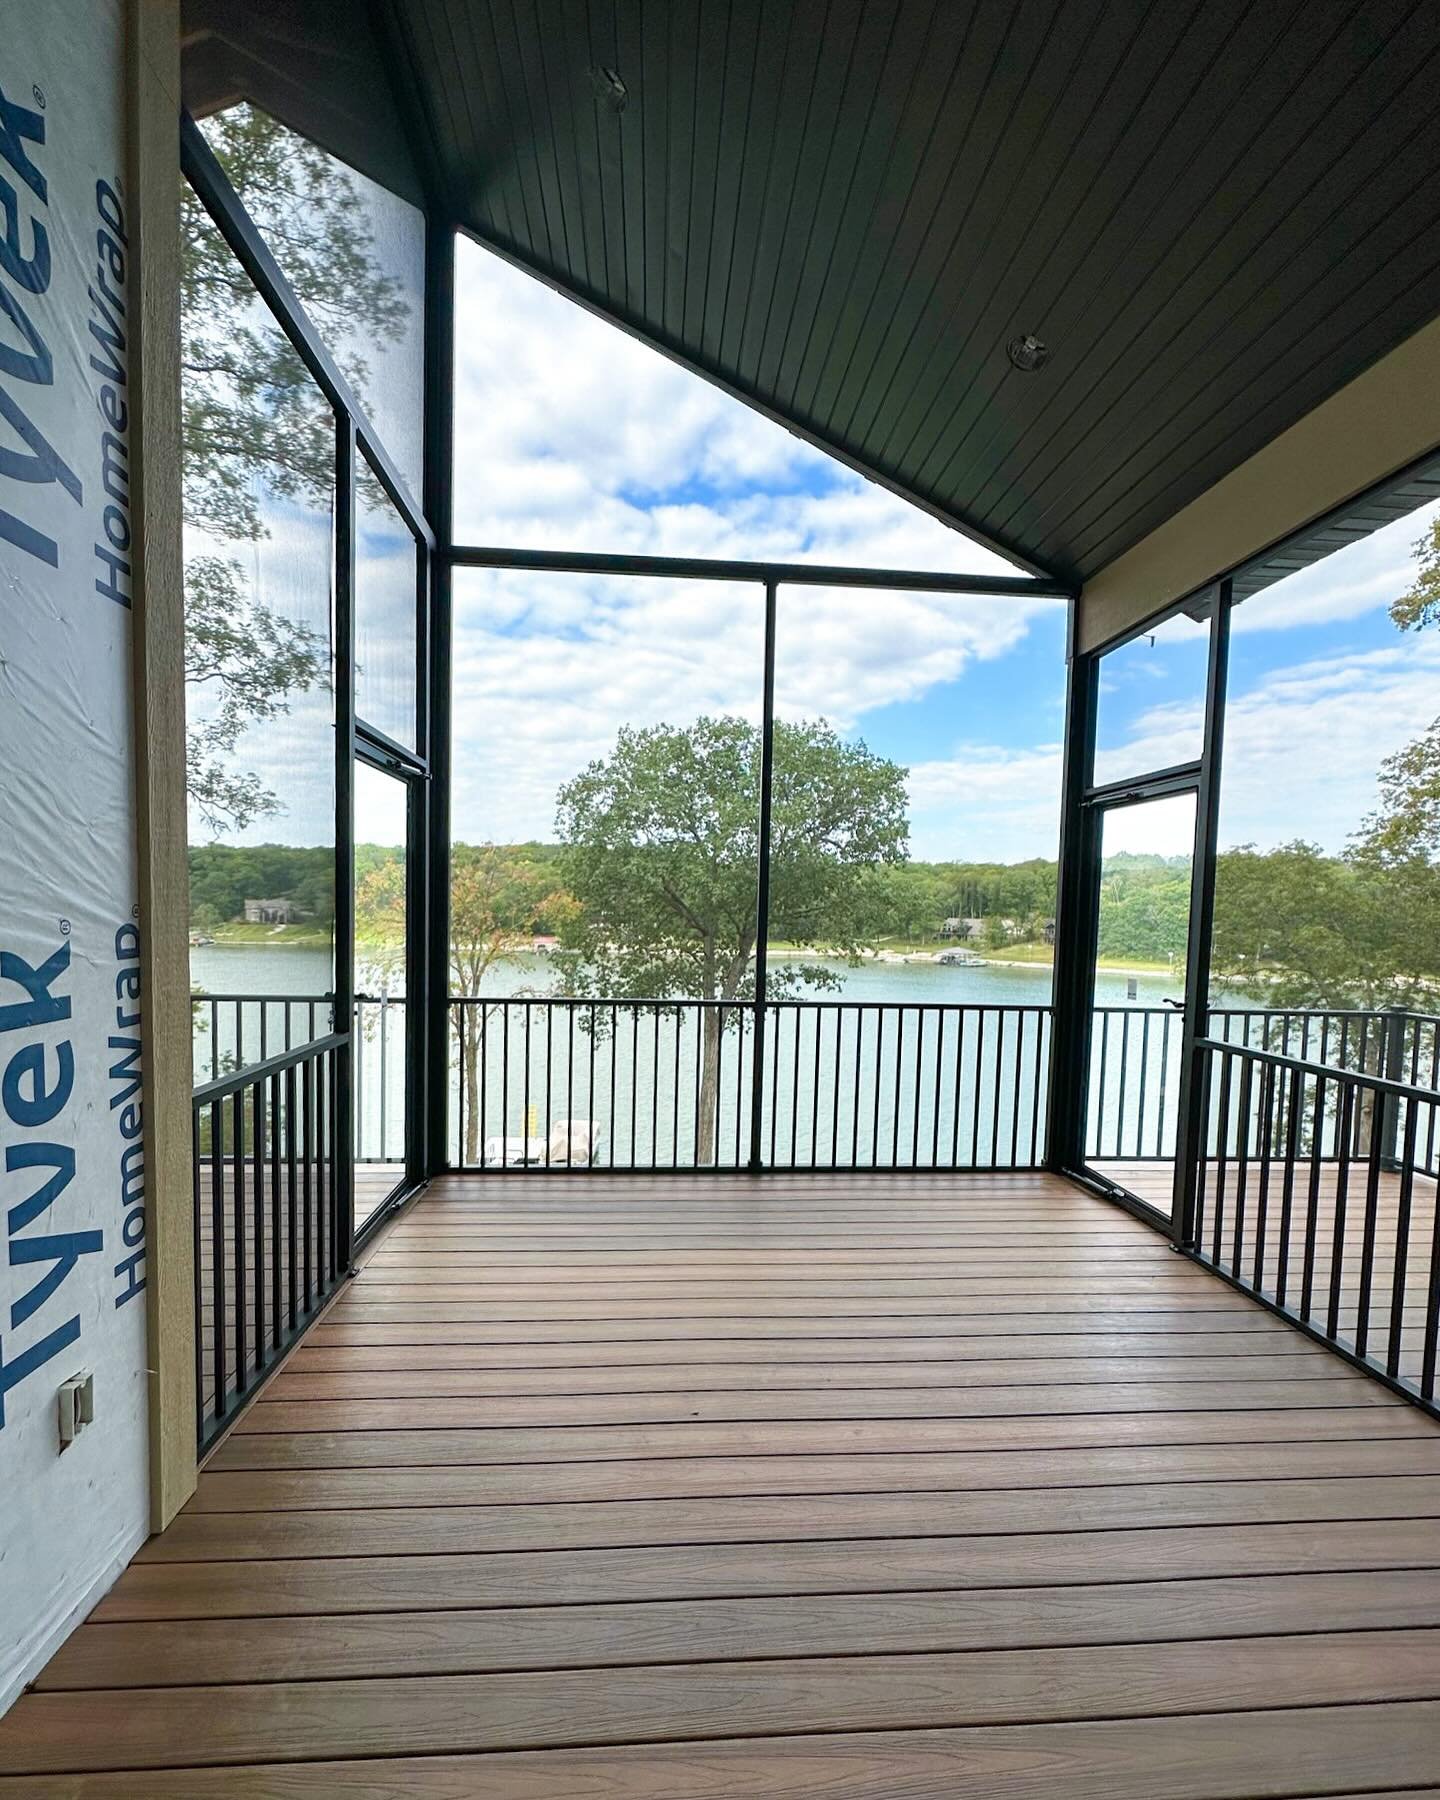 This was our second summer making the trek to Moravia, Iowa to build a deck and screened porch on beautiful Sundown Lake. Bummed we won&rsquo;t get a chance to see this home finished because it&rsquo;s sure to be a showstopper!

&bull; Fiberon Deckin